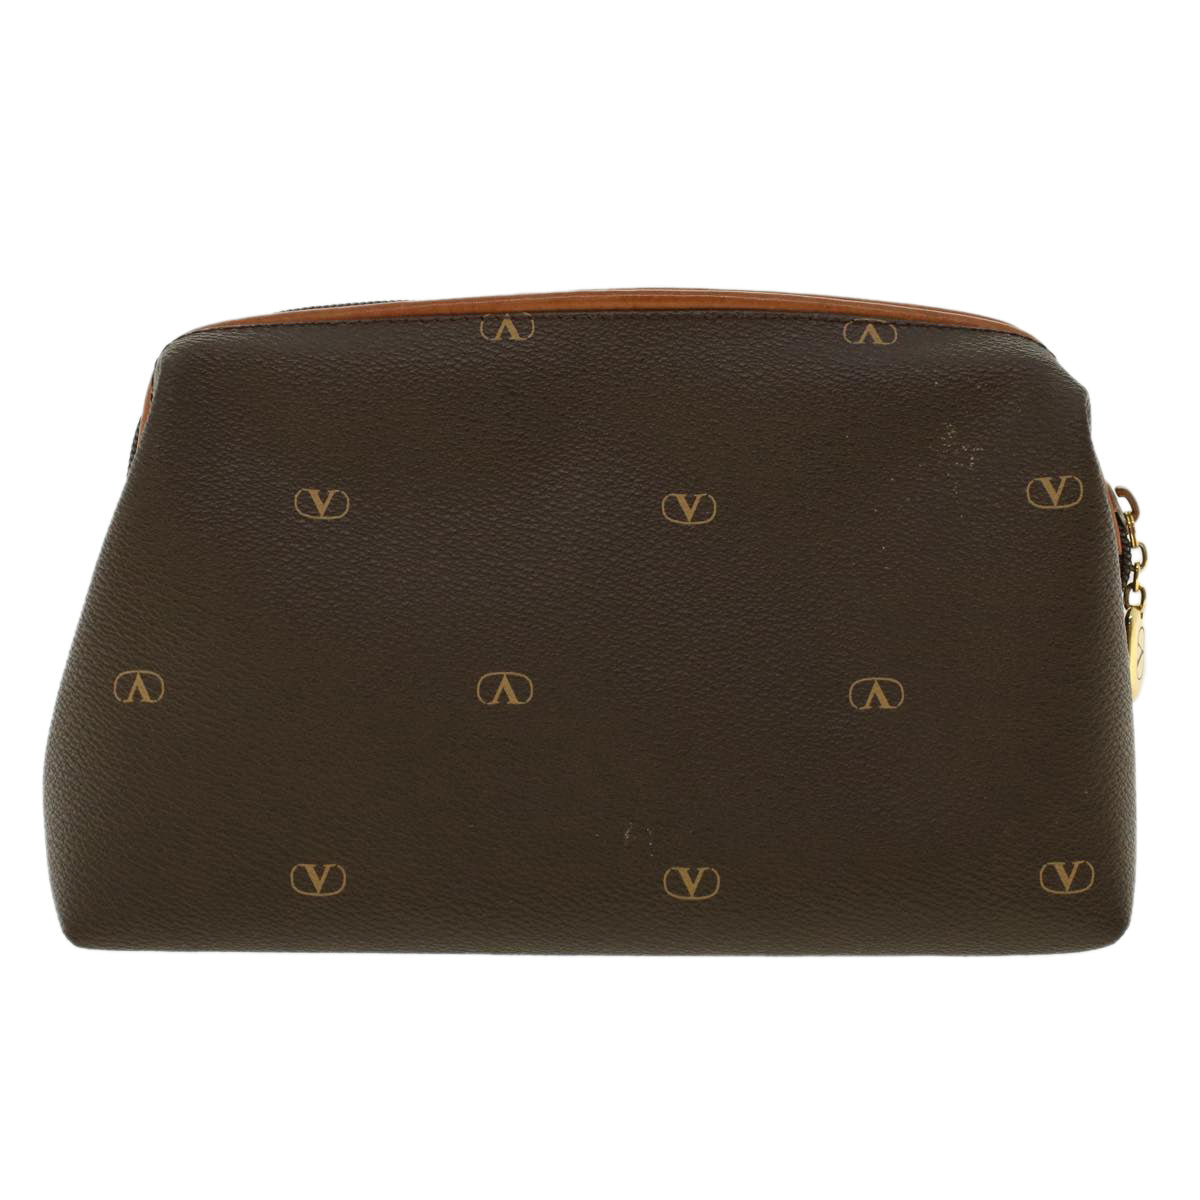 VALENTINO Clutch Bag Leather Brown Auth ar9399